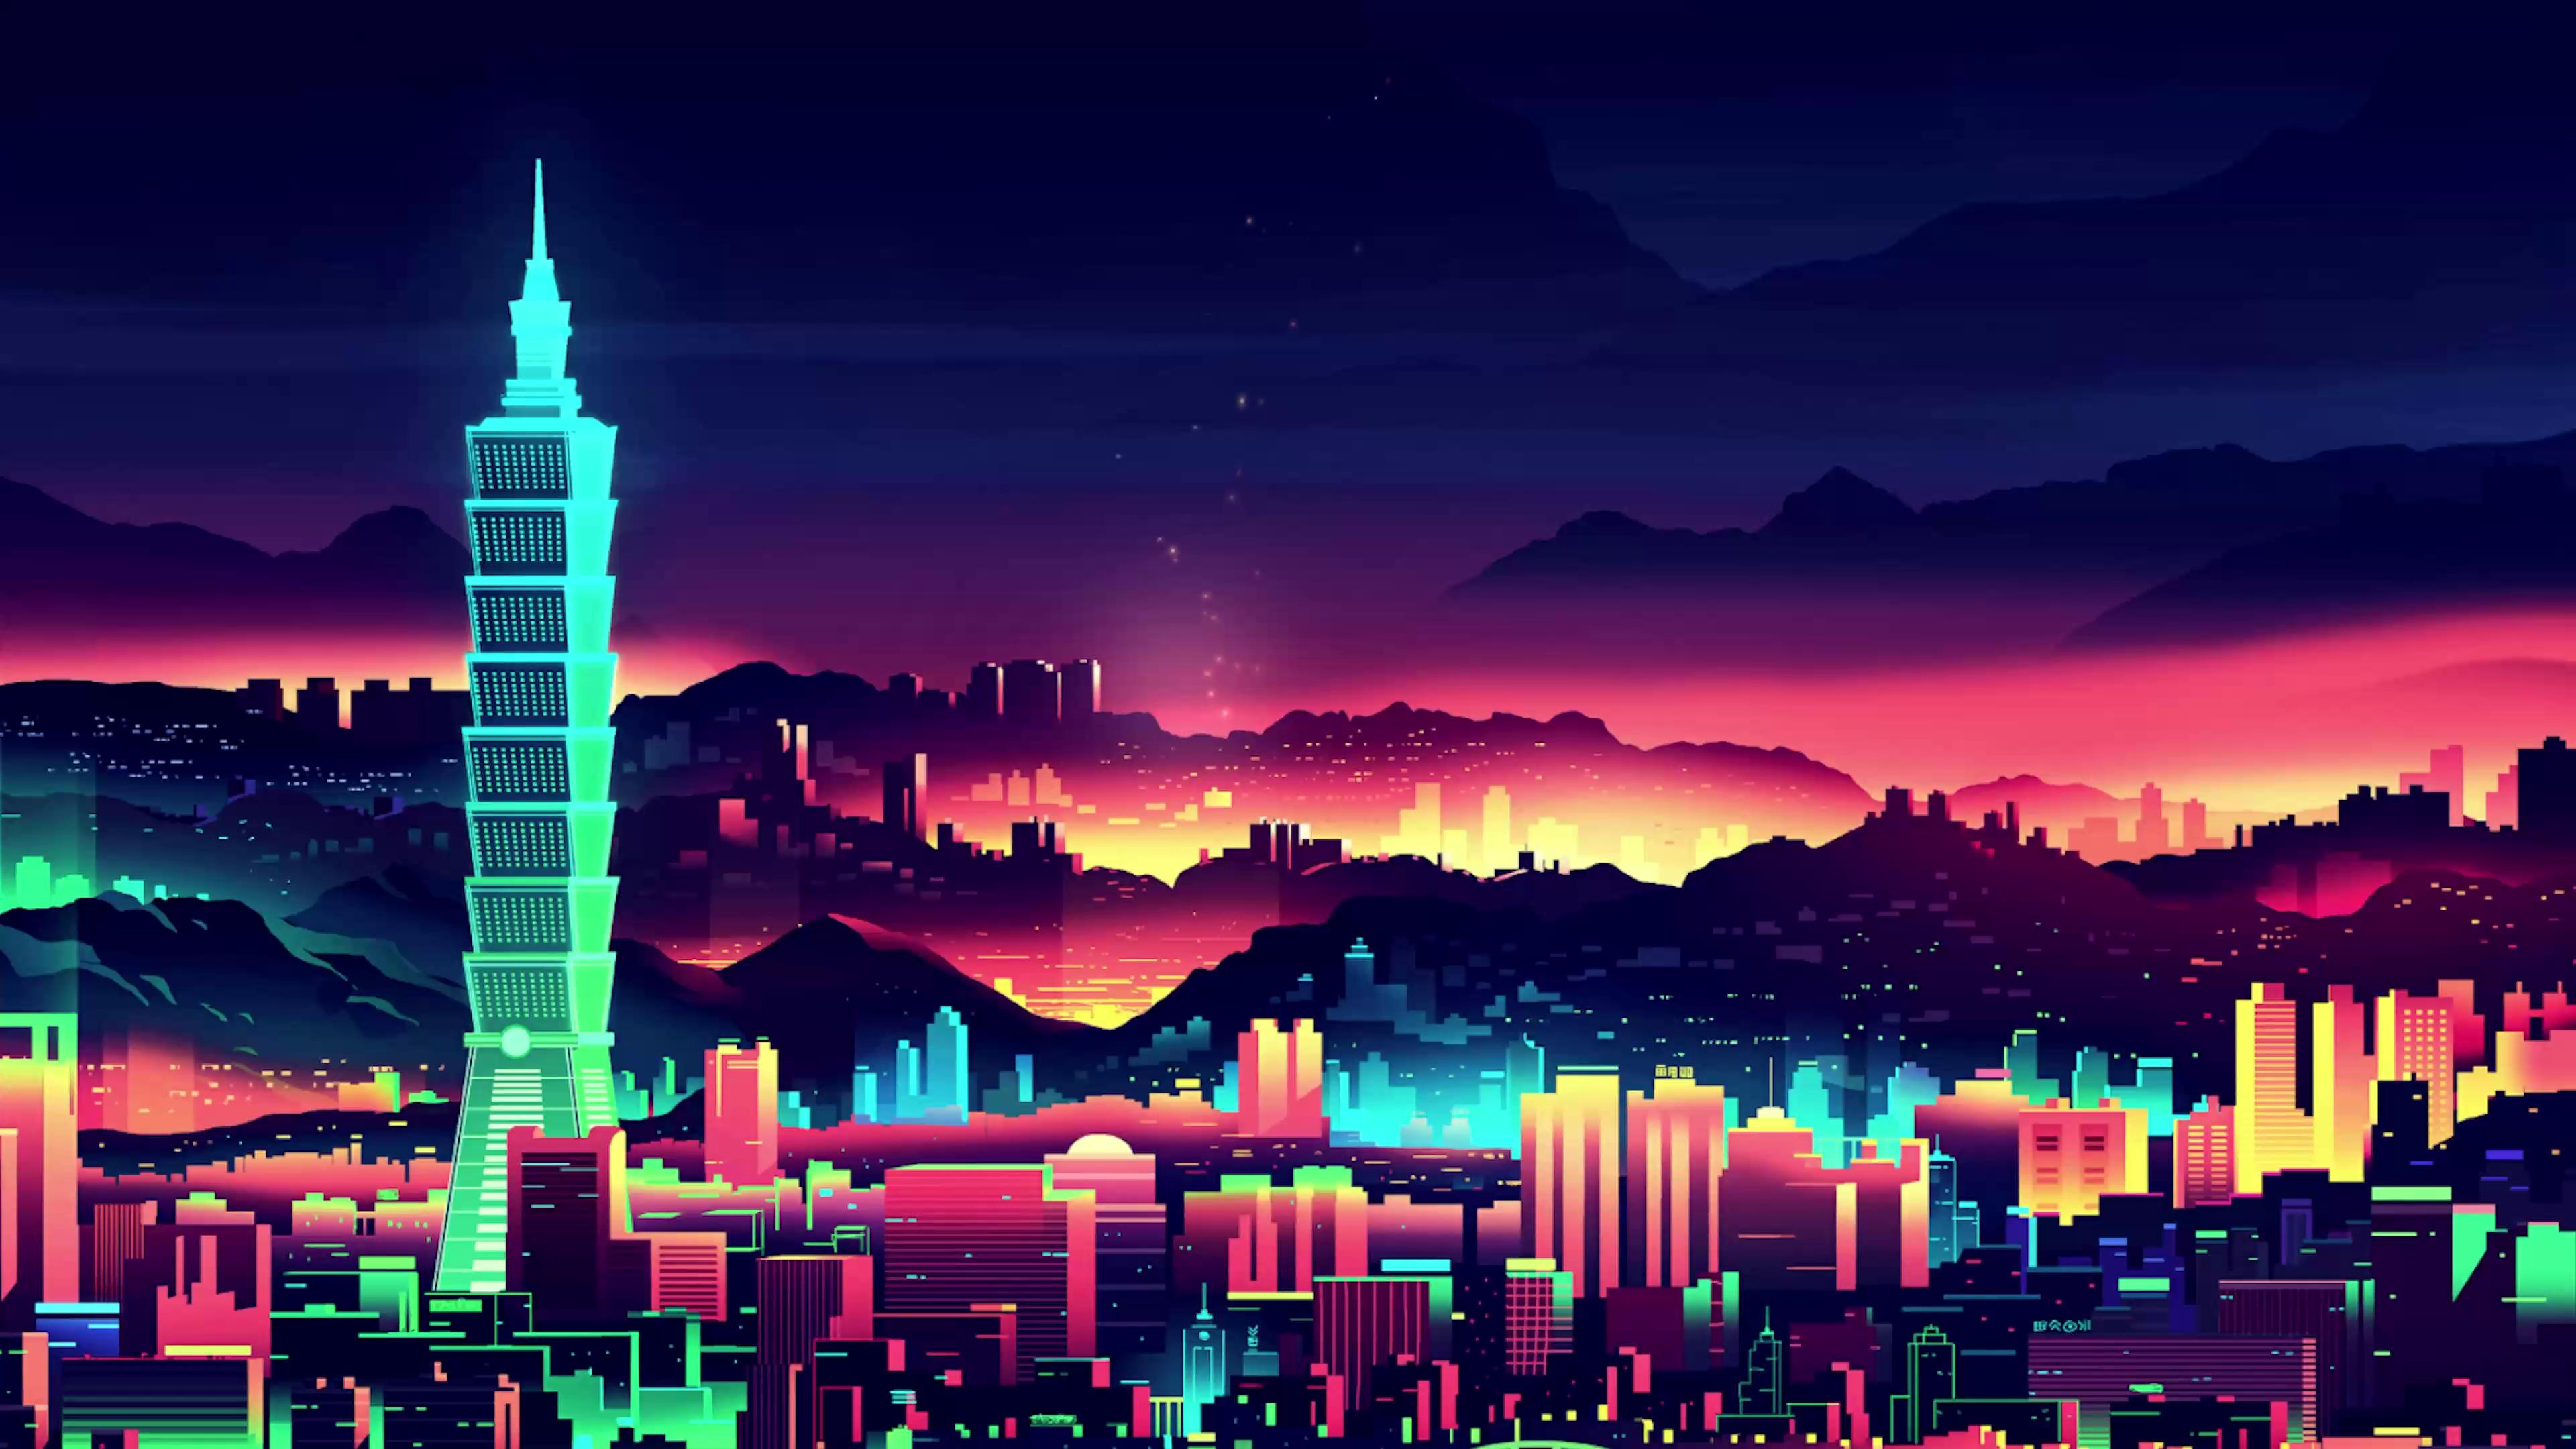 Aesthetic City at the Night Live Wallpaper